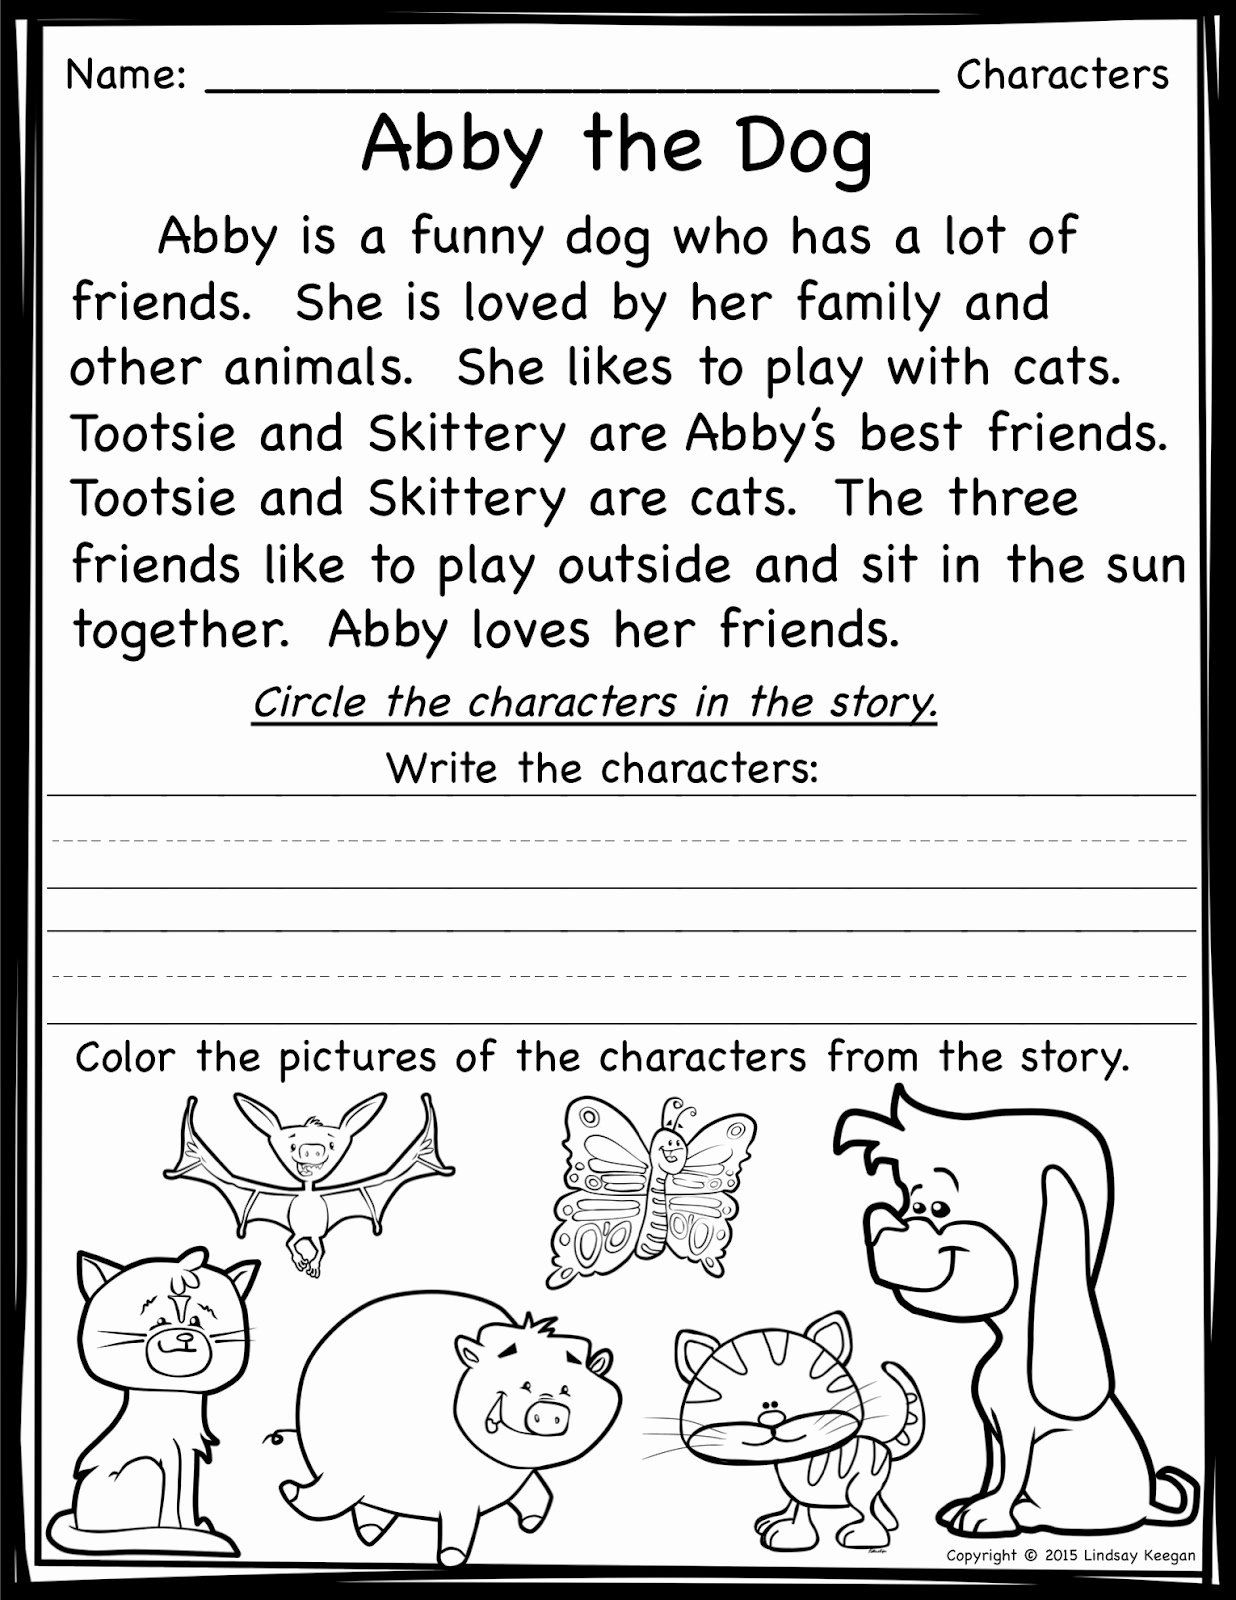 Elements Of A Story Worksheet Best Of Keeping It Cool at School Teaching Story Elements and A